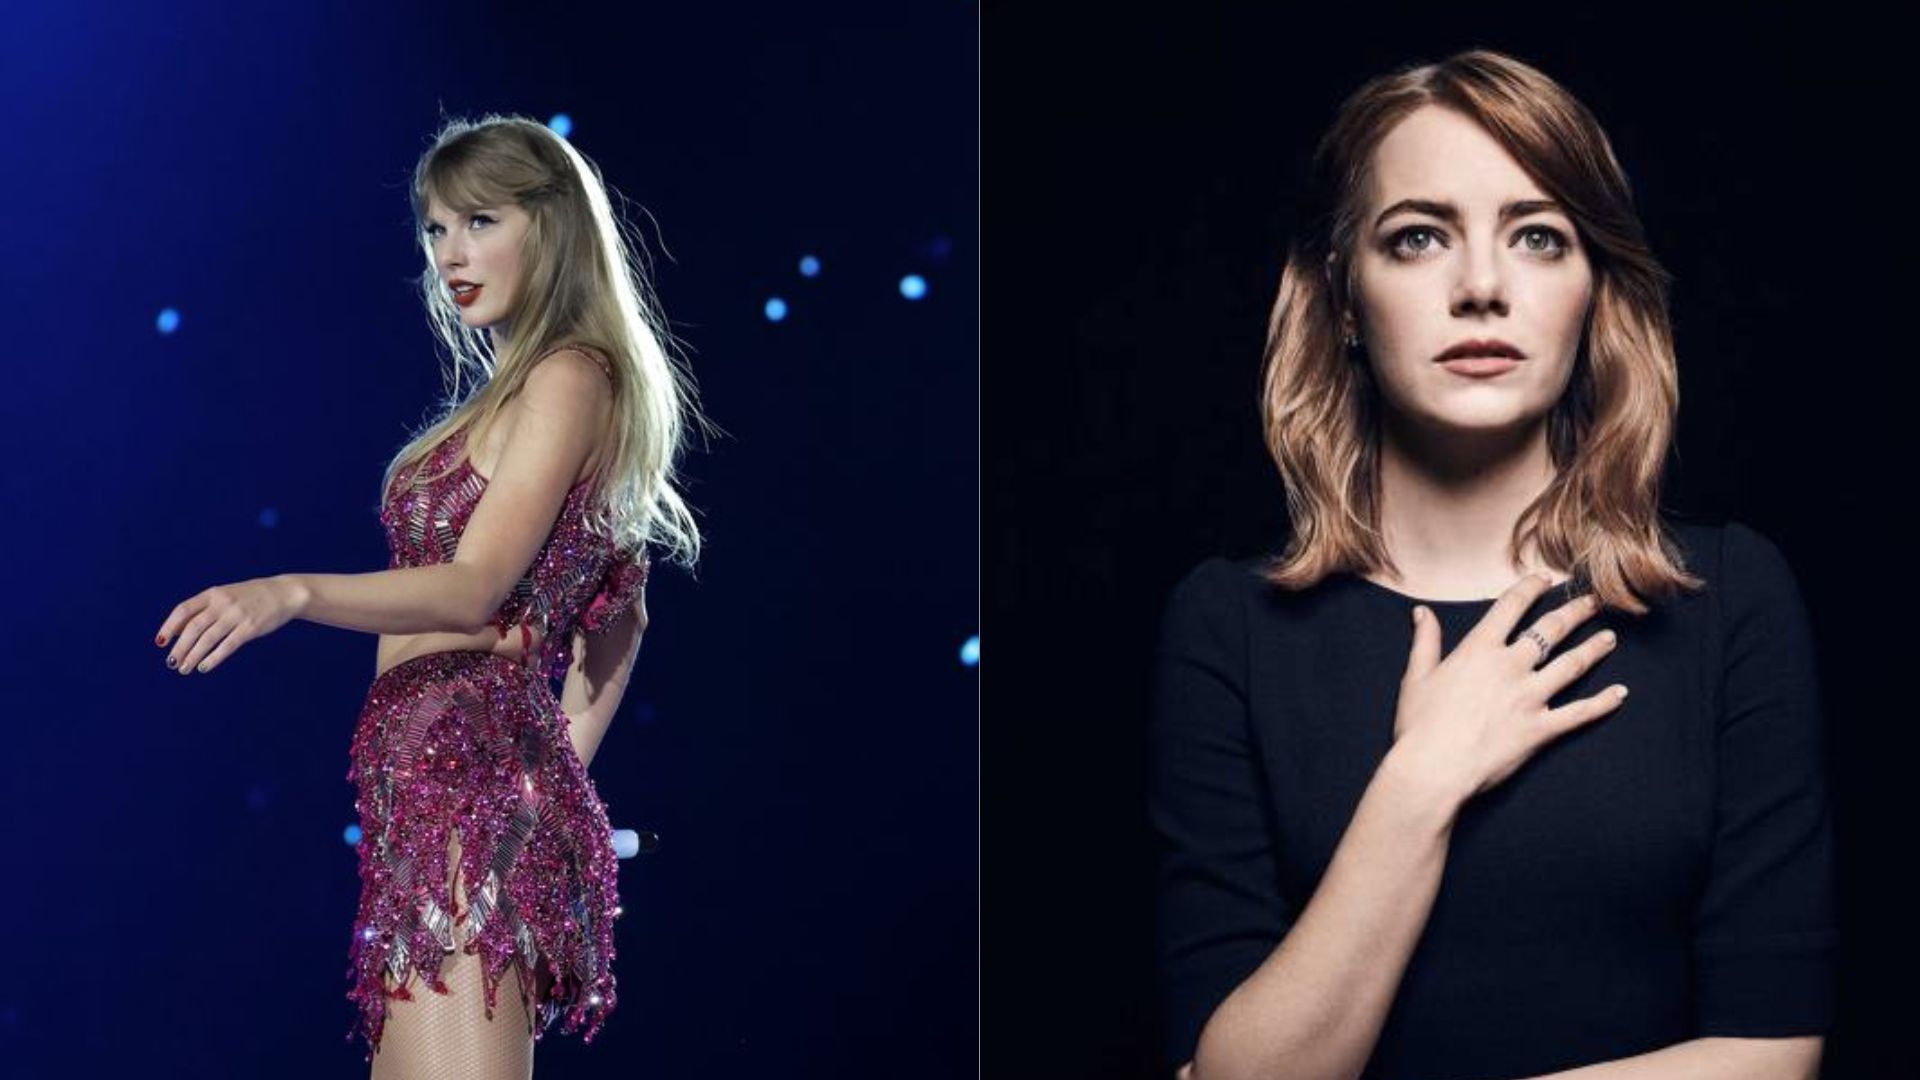 Emma Stone swears to never joke about Taylor Swift again after backlash